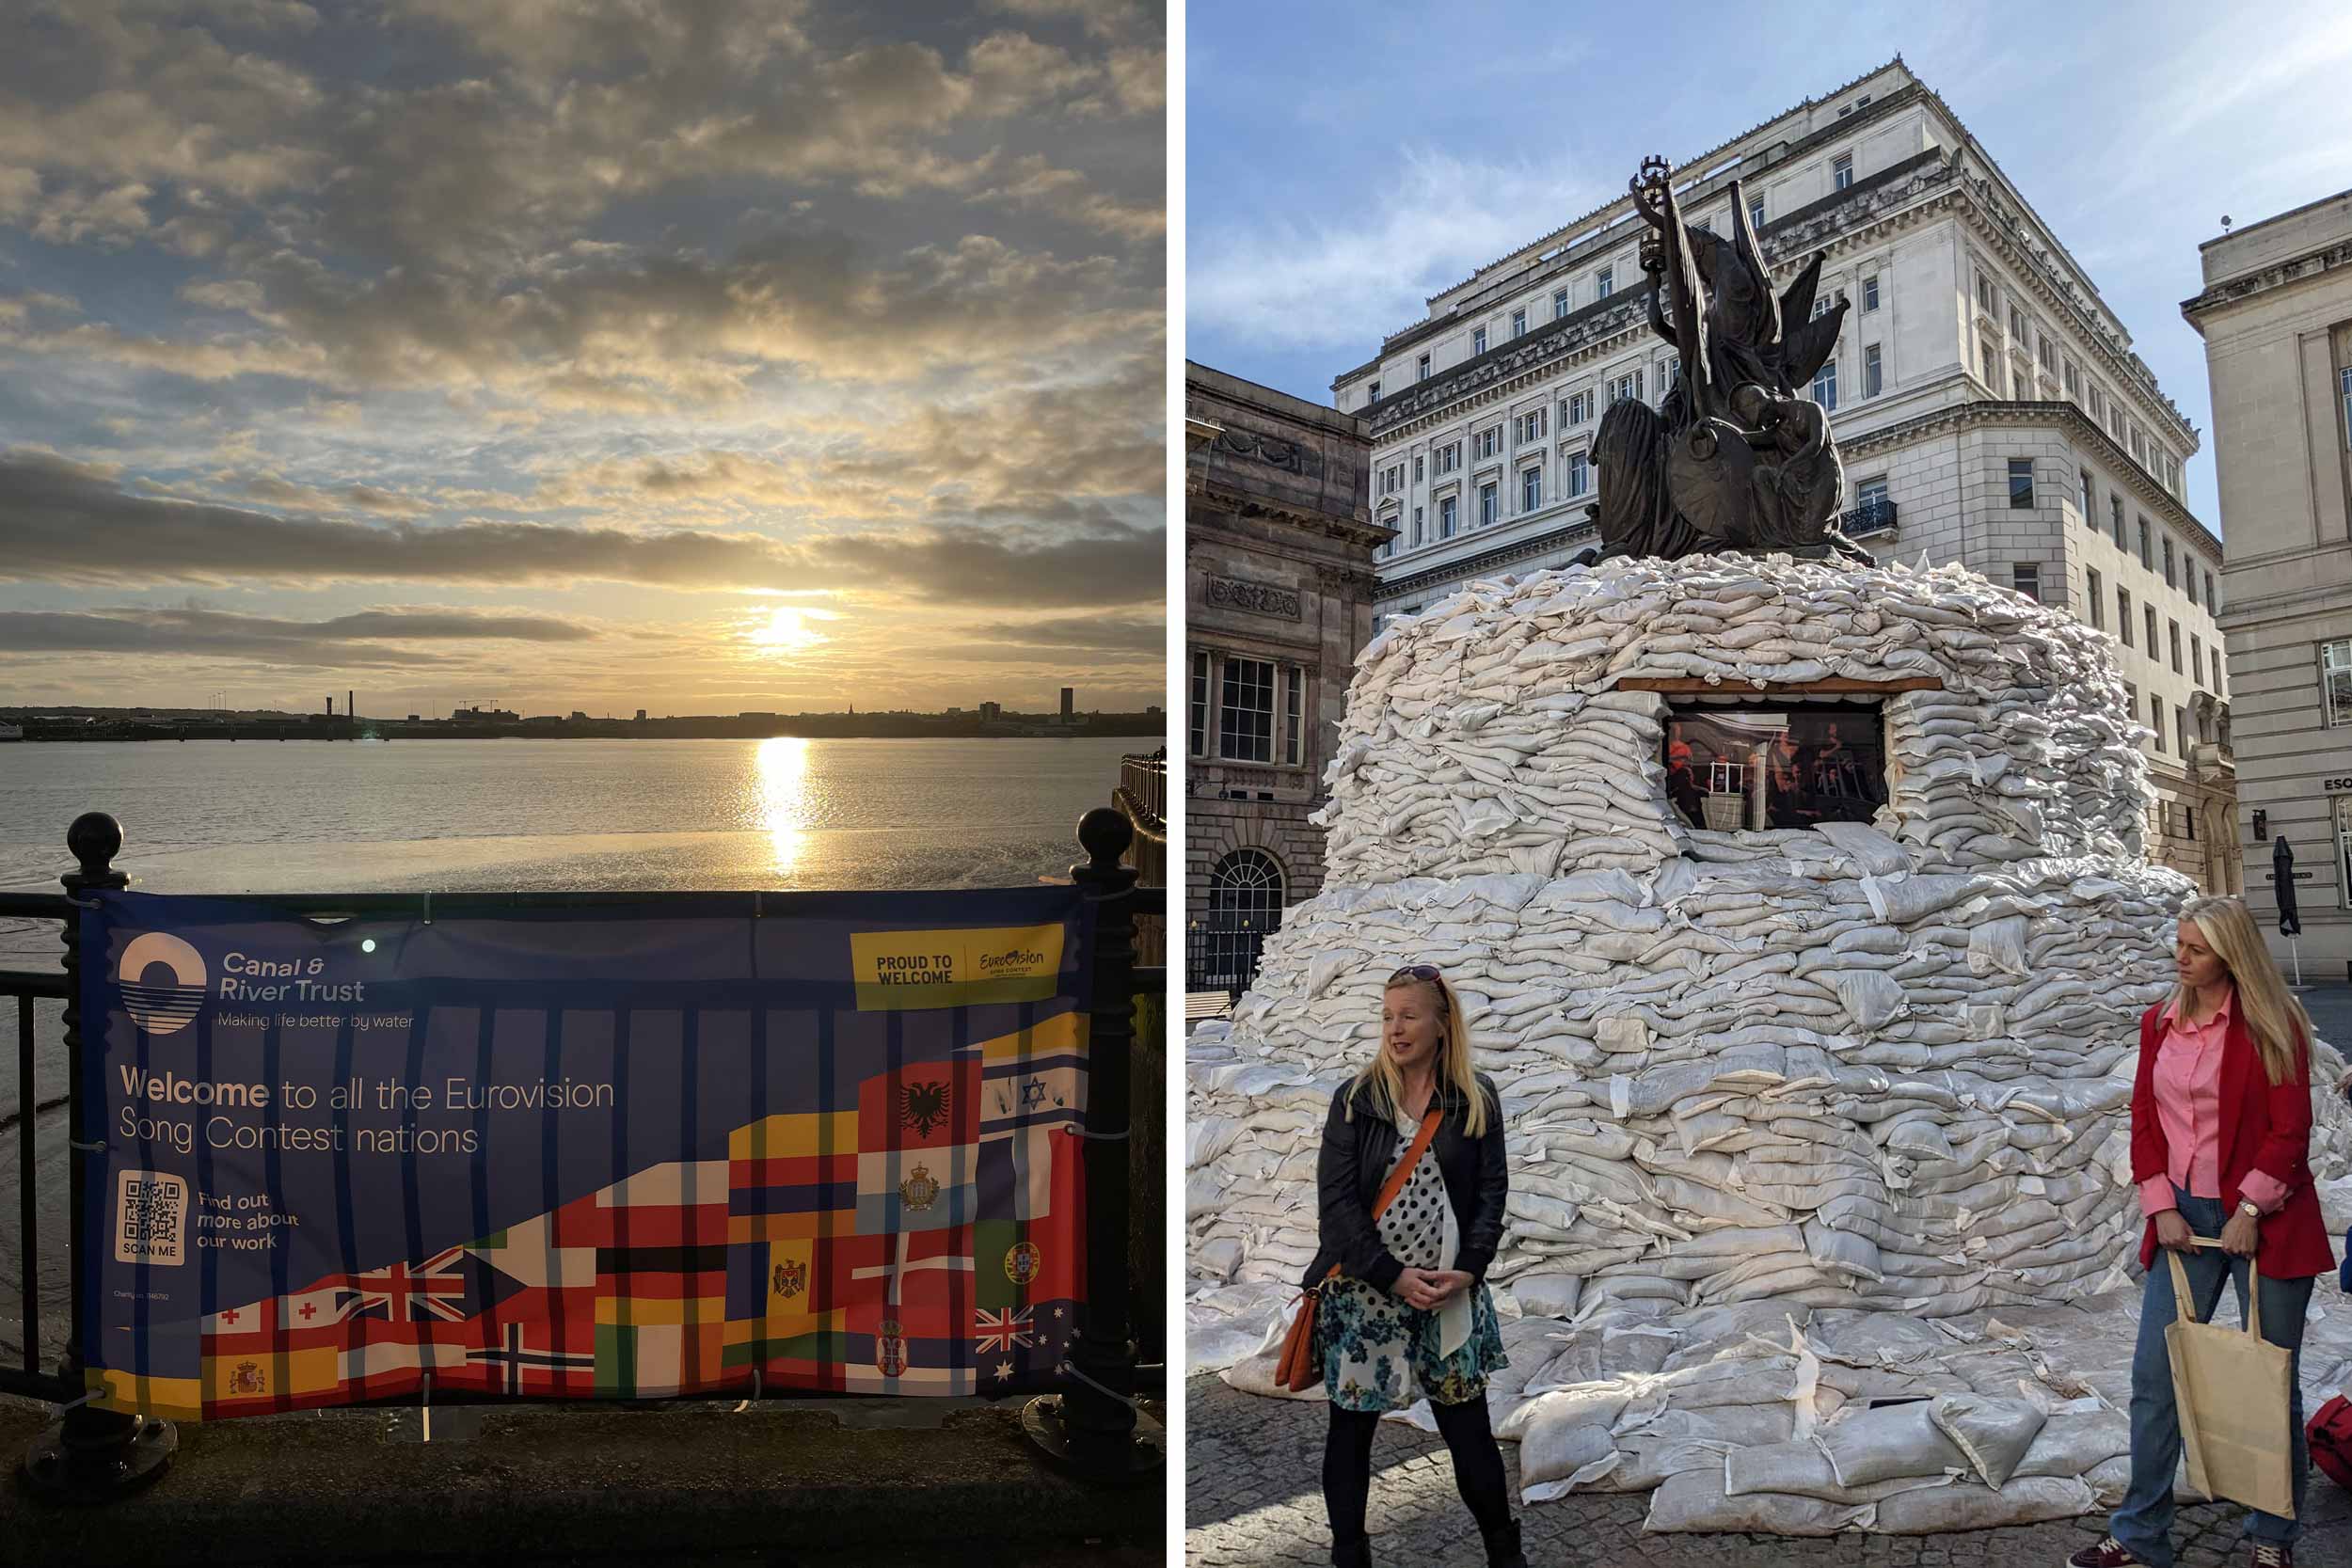 (left) Banners of the Eurovision song contest are all over Liverpool, the city hosting the 2023 edition on behalf of Ukraine. The Ukrainian Orchestra Kalush won in 2022, but could not host the event due to the ongoing Russian invasion. © Anna Kovalska (right) In Liverpool, a monument to Admiral Horatio Nelson was covered with sandbags as a sign of solidarity towards Ukraine. The UK is hosting the 2023 Eurovision Song Contest on behalf of Ukraine, which won the 2022 edition but could not hold the event due to the ongoing Russian invasion. © Marina Pesenti 